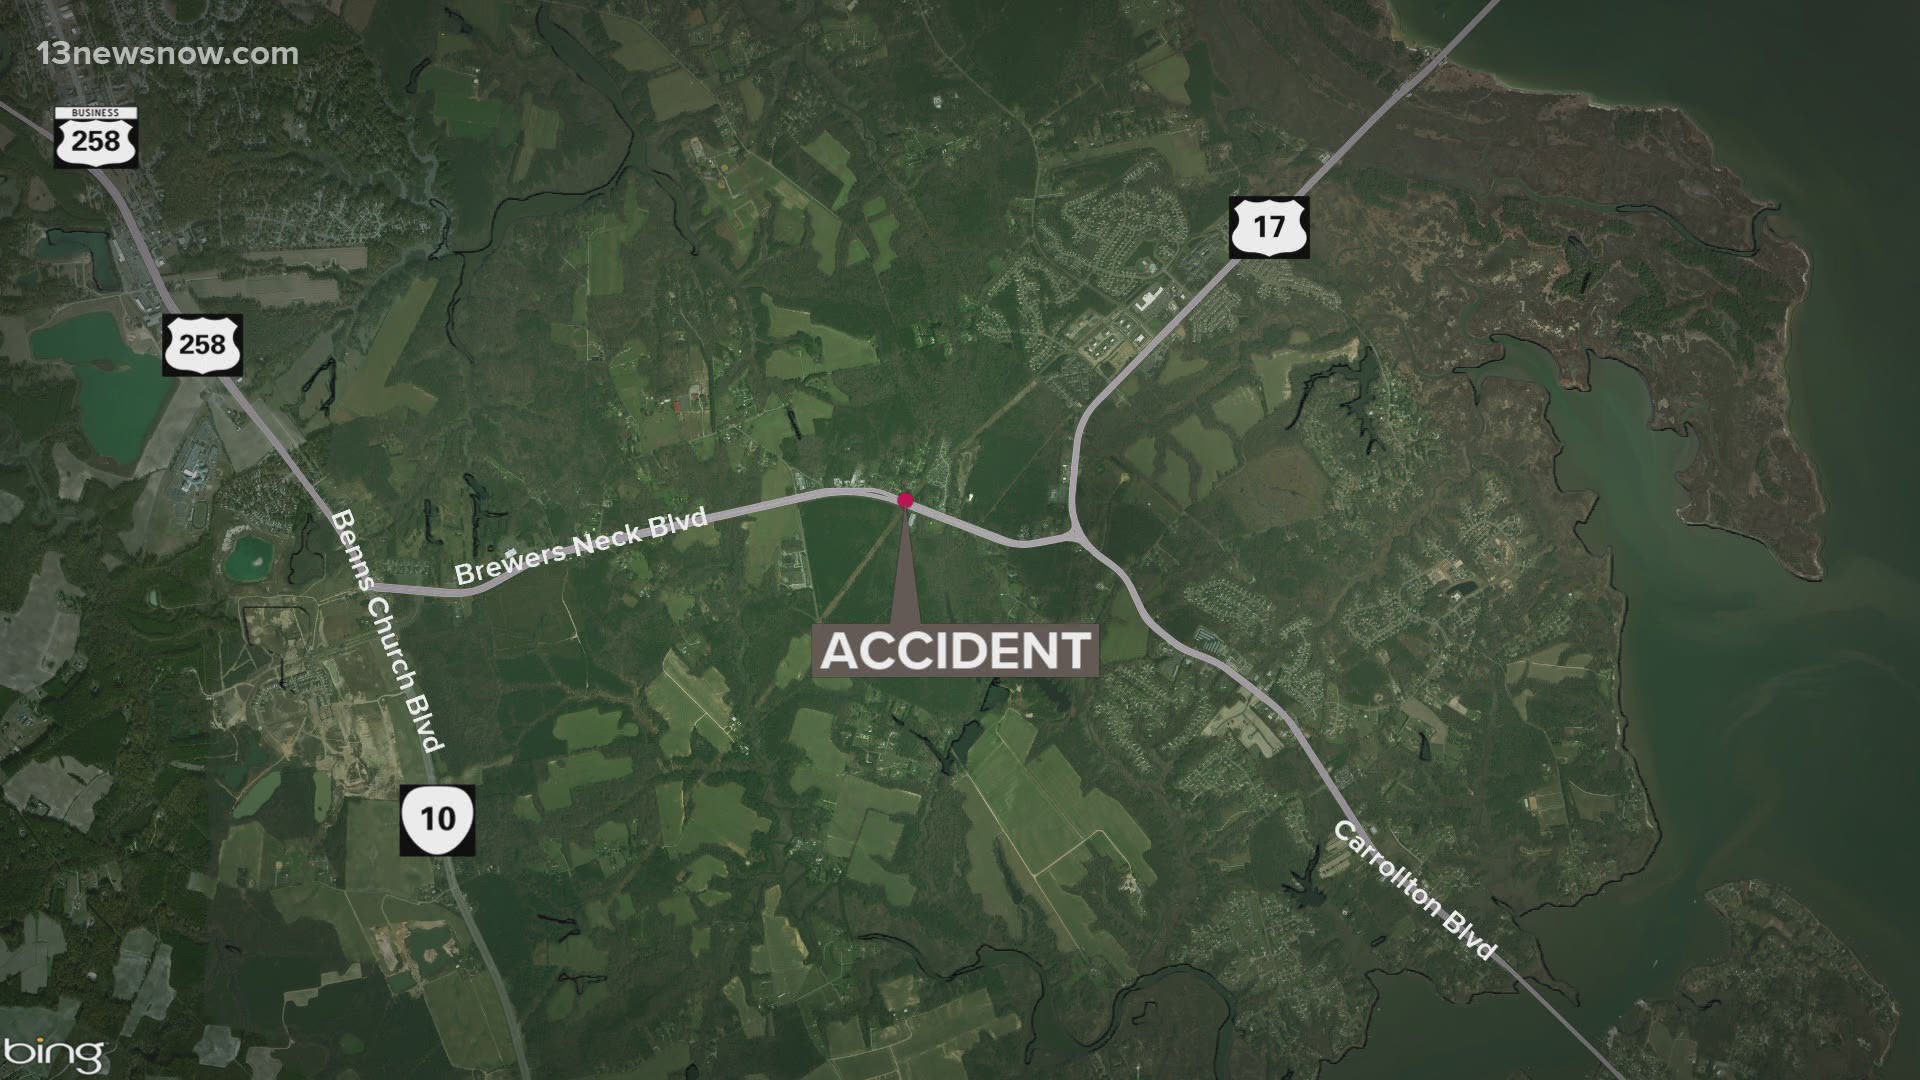 The accident, on Brewers Neck Boulevard just south of Route 17, happened around 10:30 p.m., according to police.